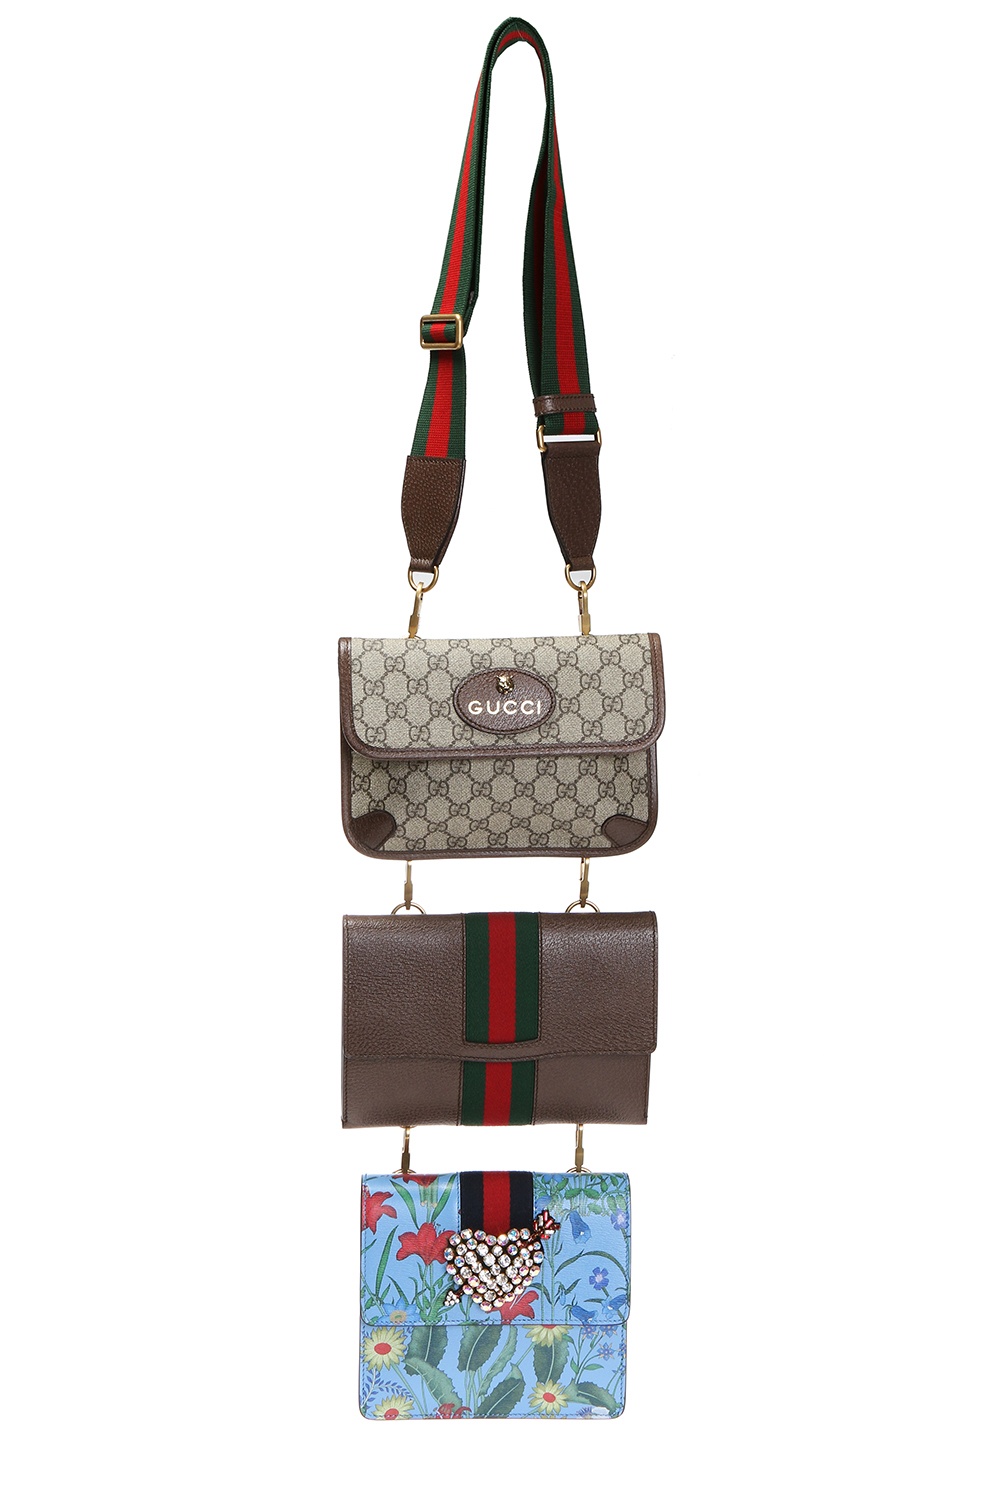 Gucci 3 Pieces Set – Bag, Shoes and Wallet NEW! – peehe